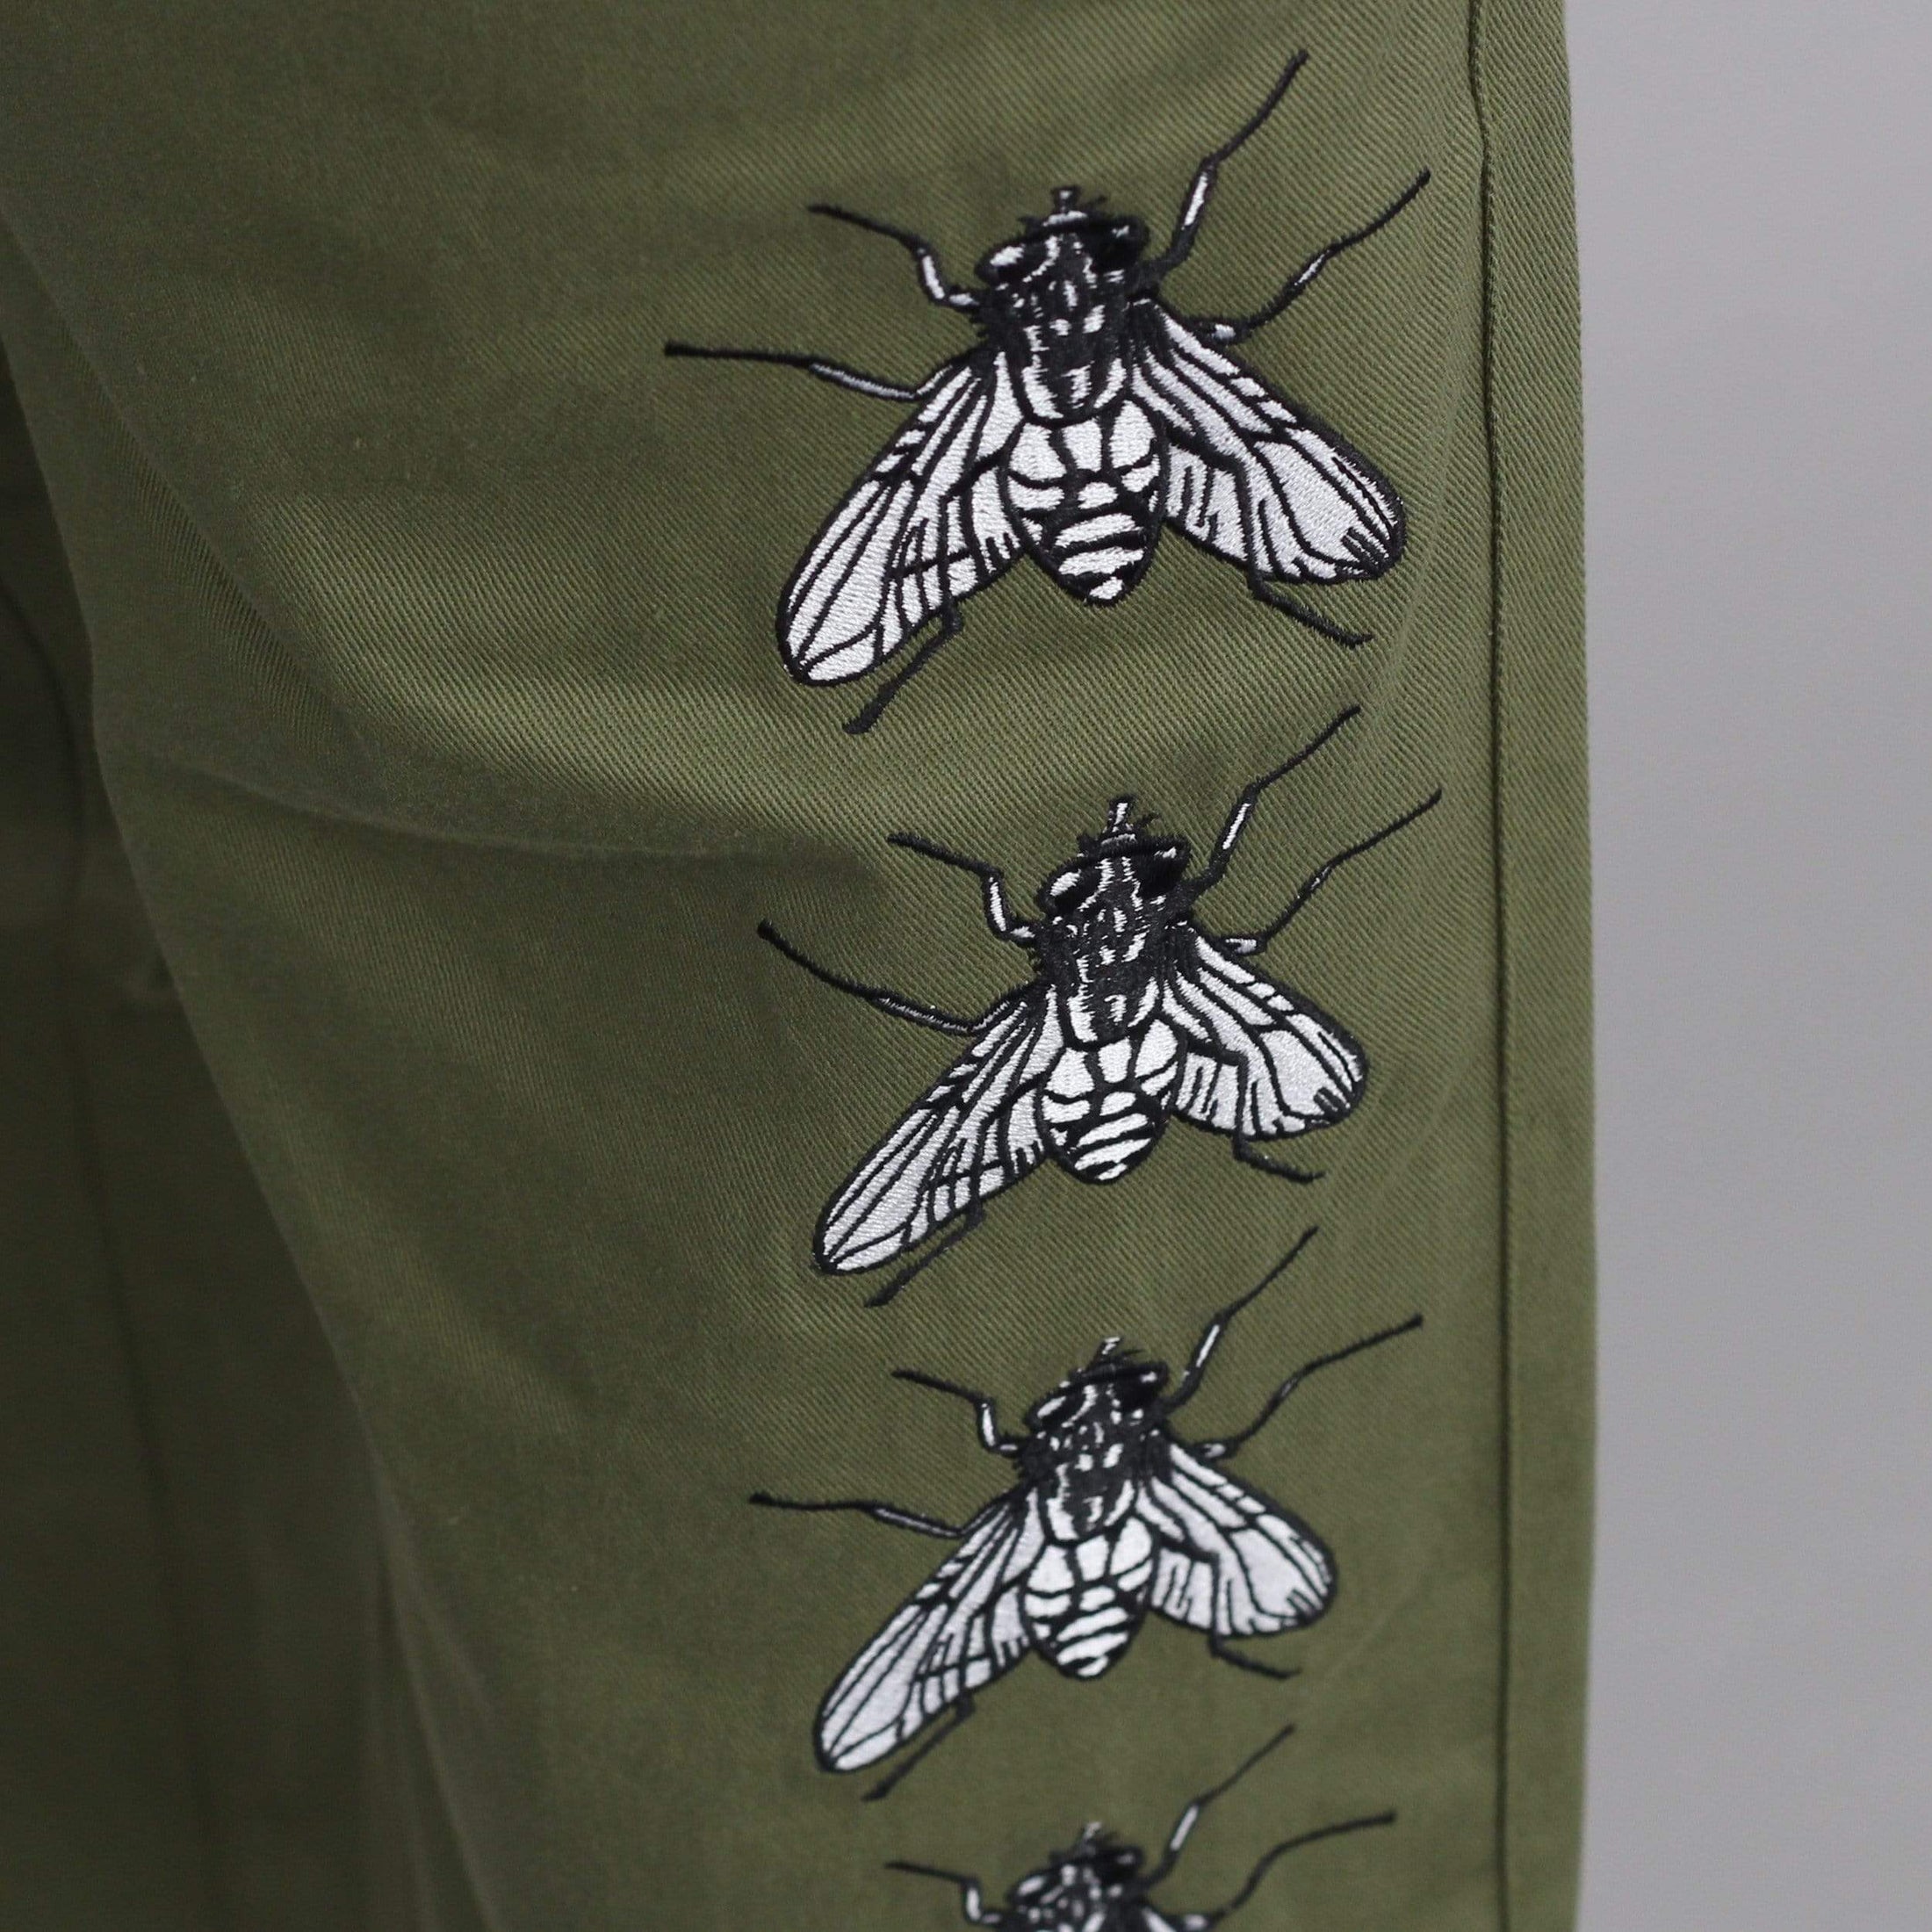 Butter Goods Swarm Embroidered Pants Army